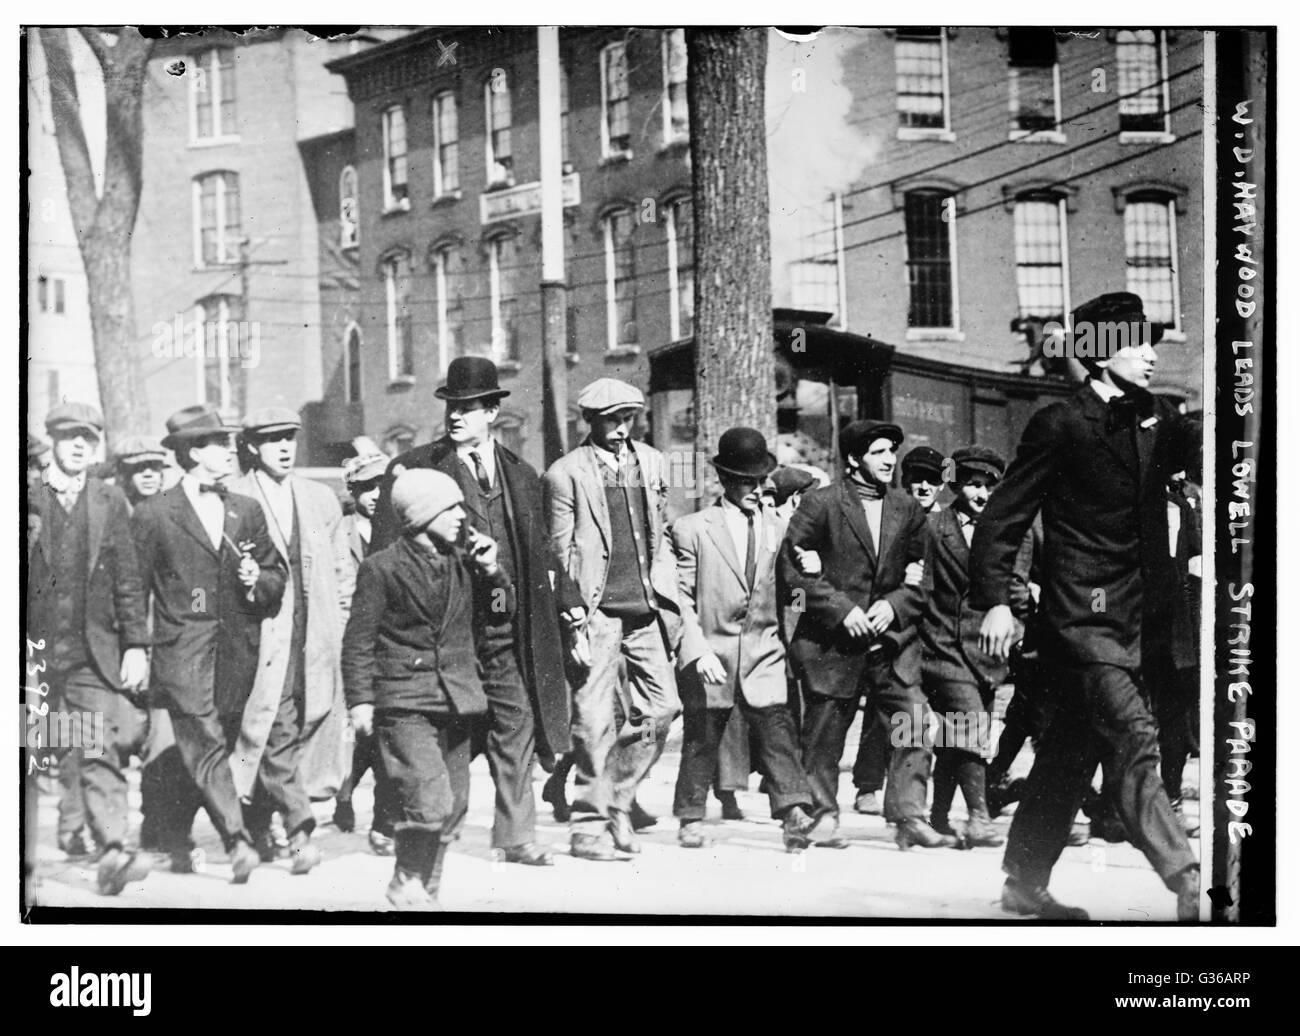 William Dudley (Big Bill) Haywood (center left with bowler hat), an American labor movement leader, marching with strikers in Lowell, Massachusetts. Stock Photo